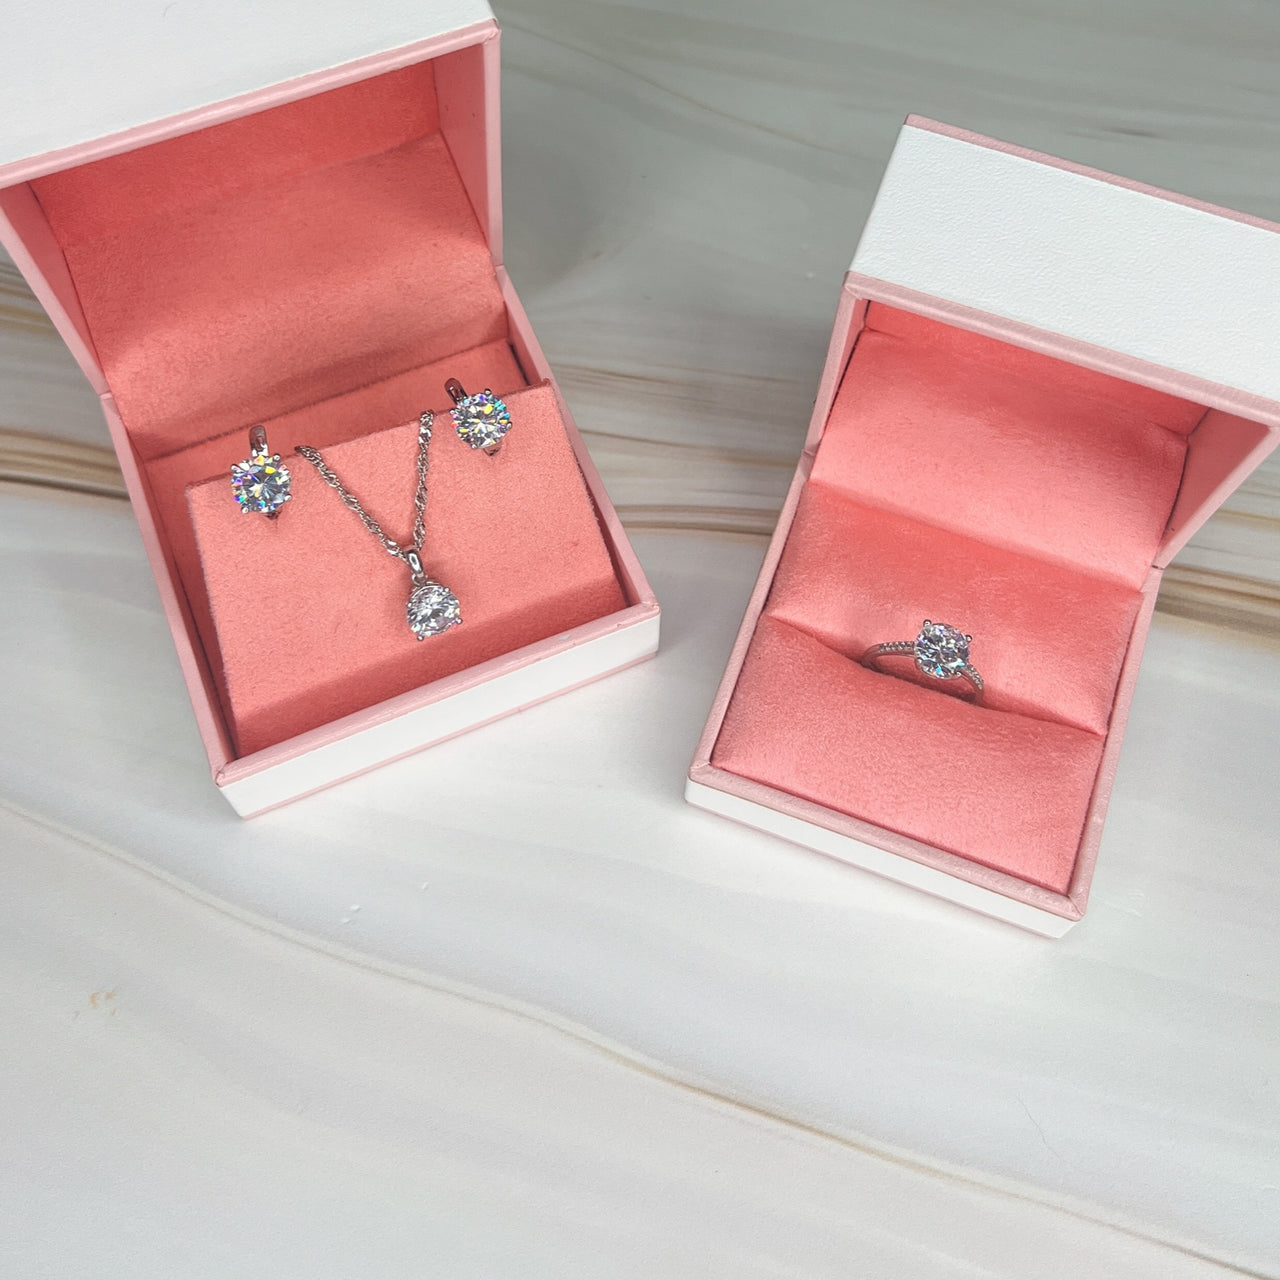 .925 Silver Set with White Topaz (BE33)